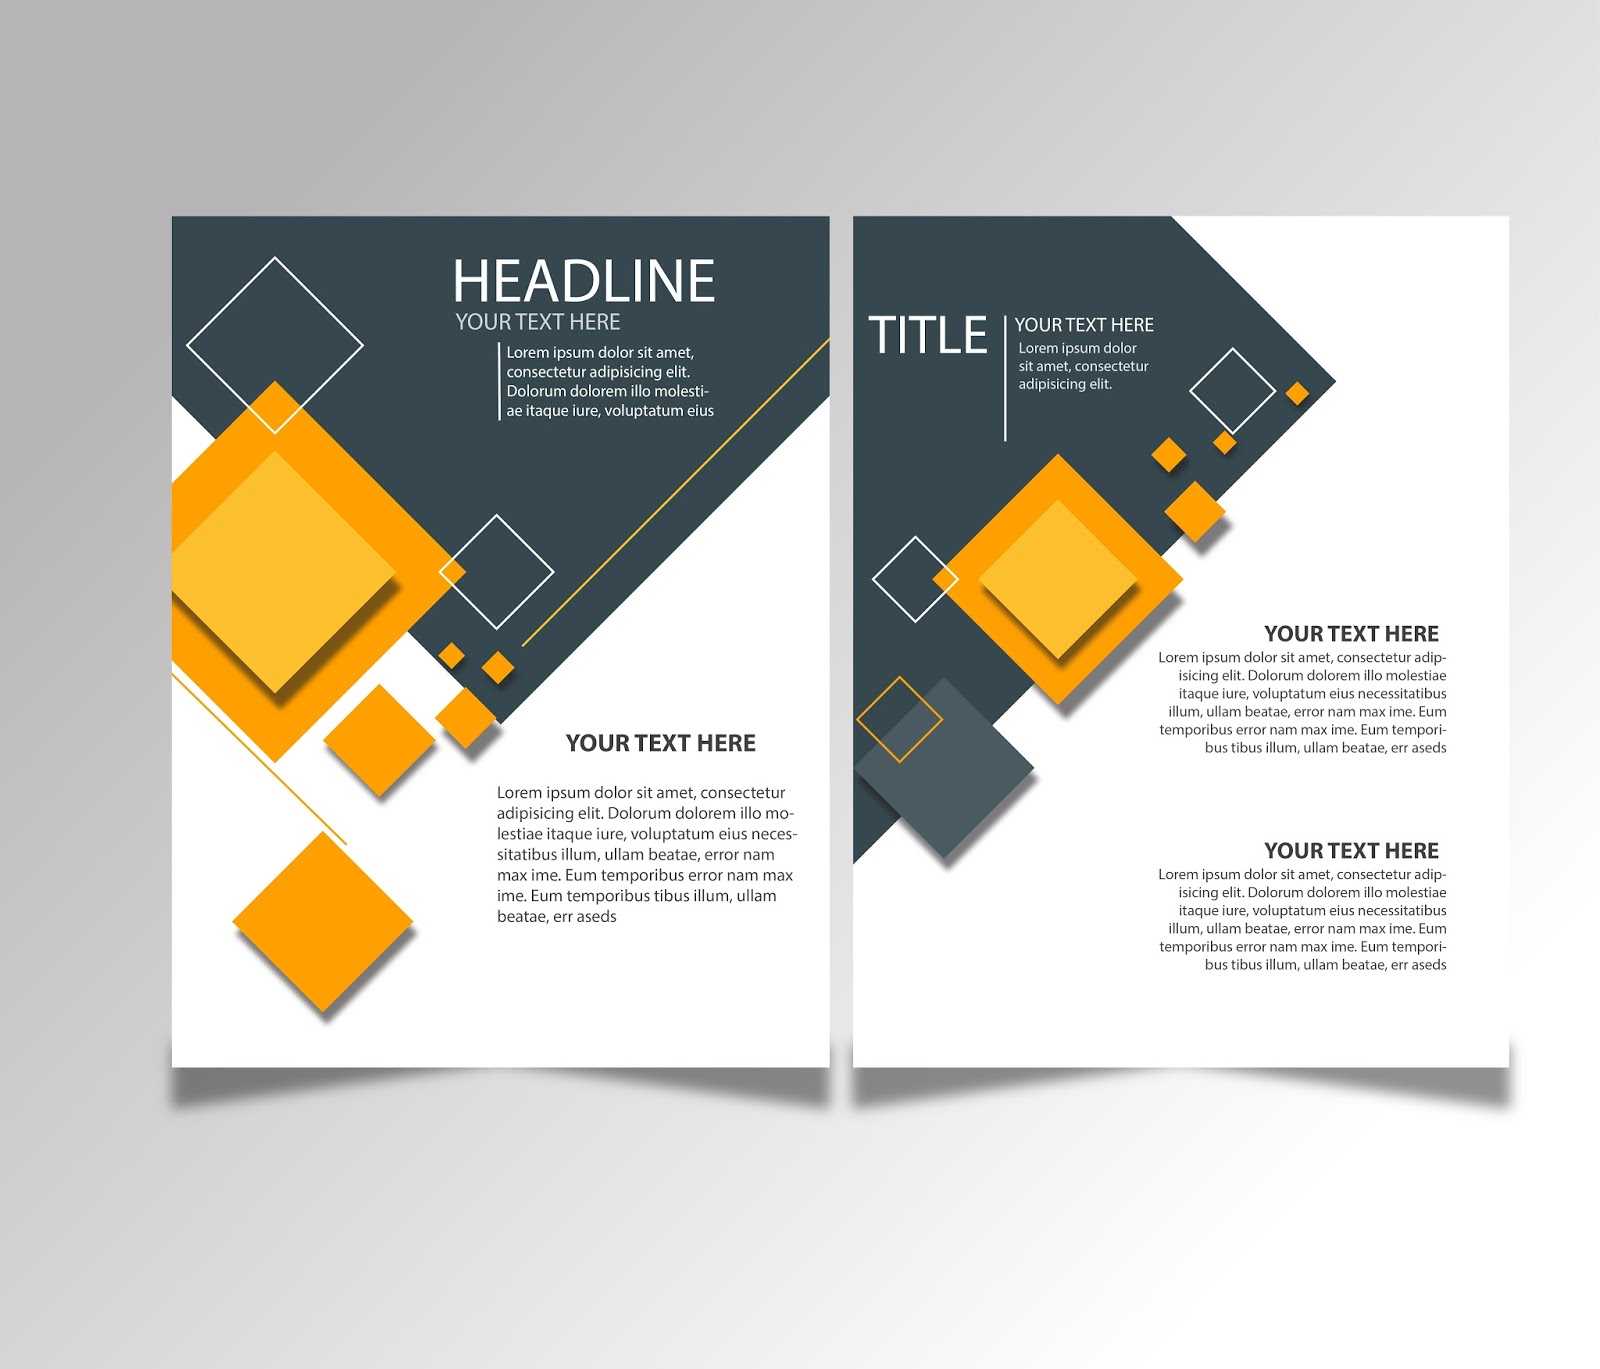 Free Download Brochure Design Templates Ai Files – Ideosprocess Throughout Adobe Illustrator Brochure Templates Free Download